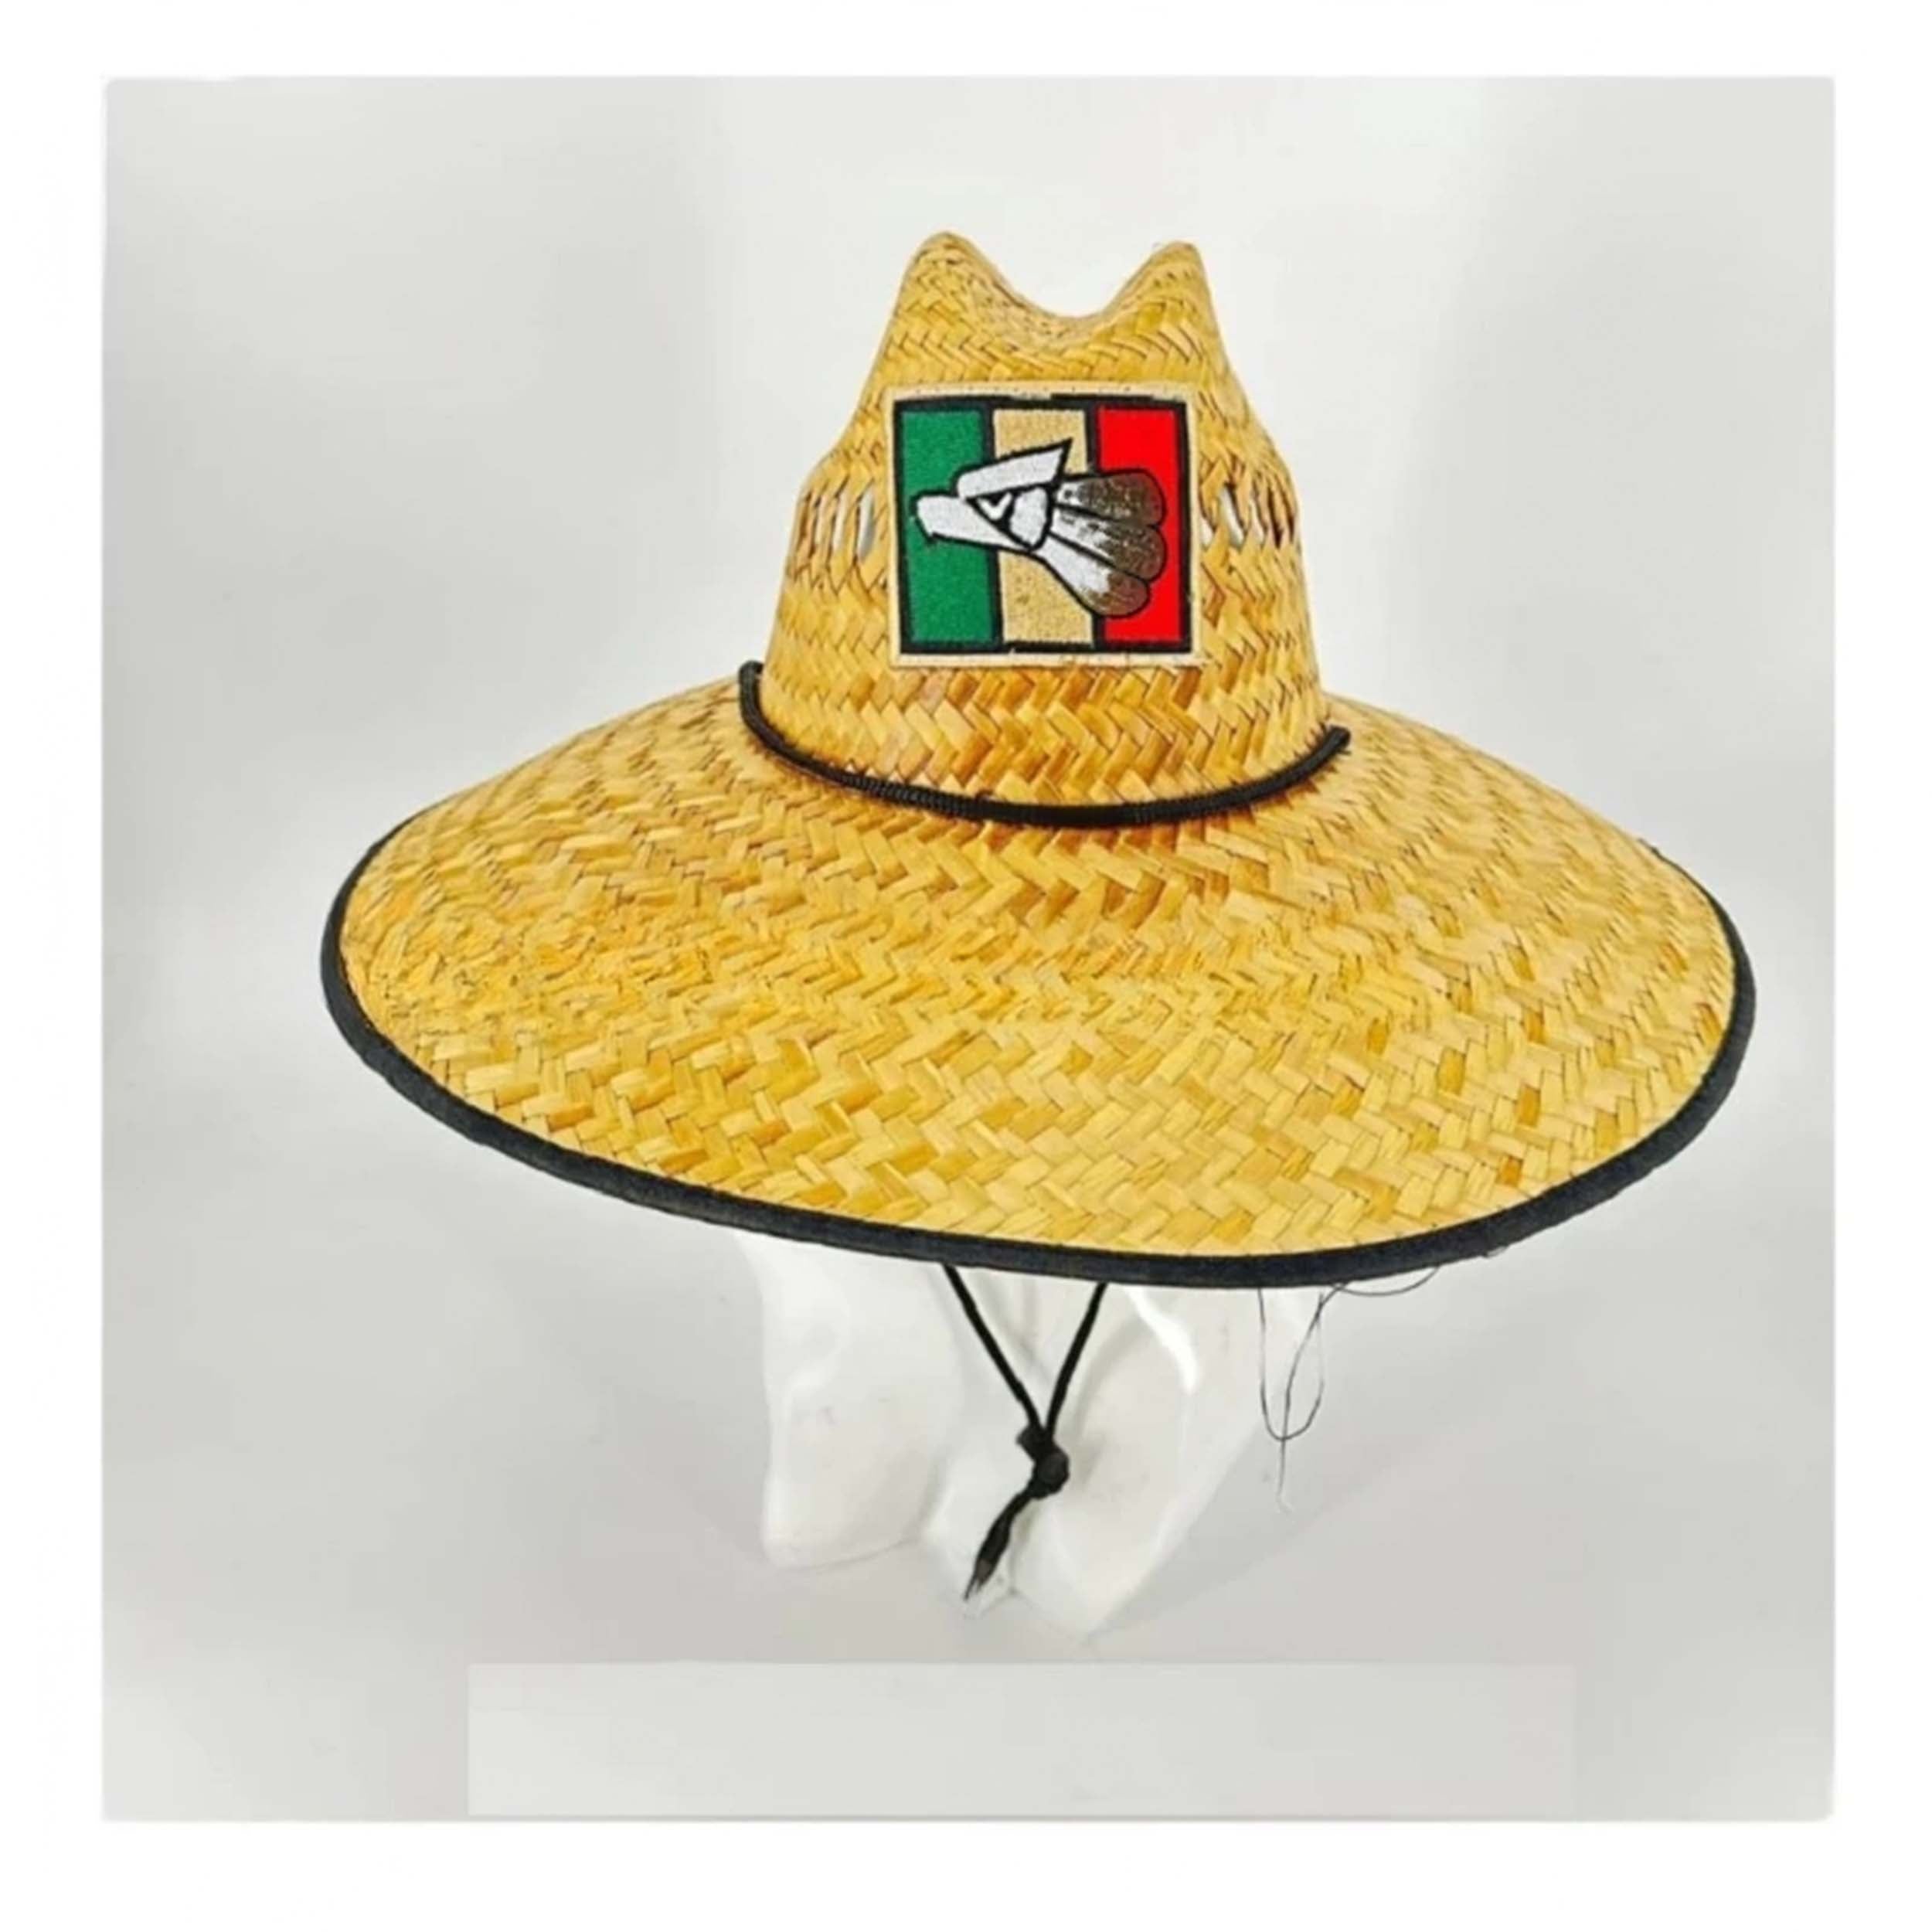 Bulk Adults Eagle Straw Hats - Soar in Style with Patriotic Flair!